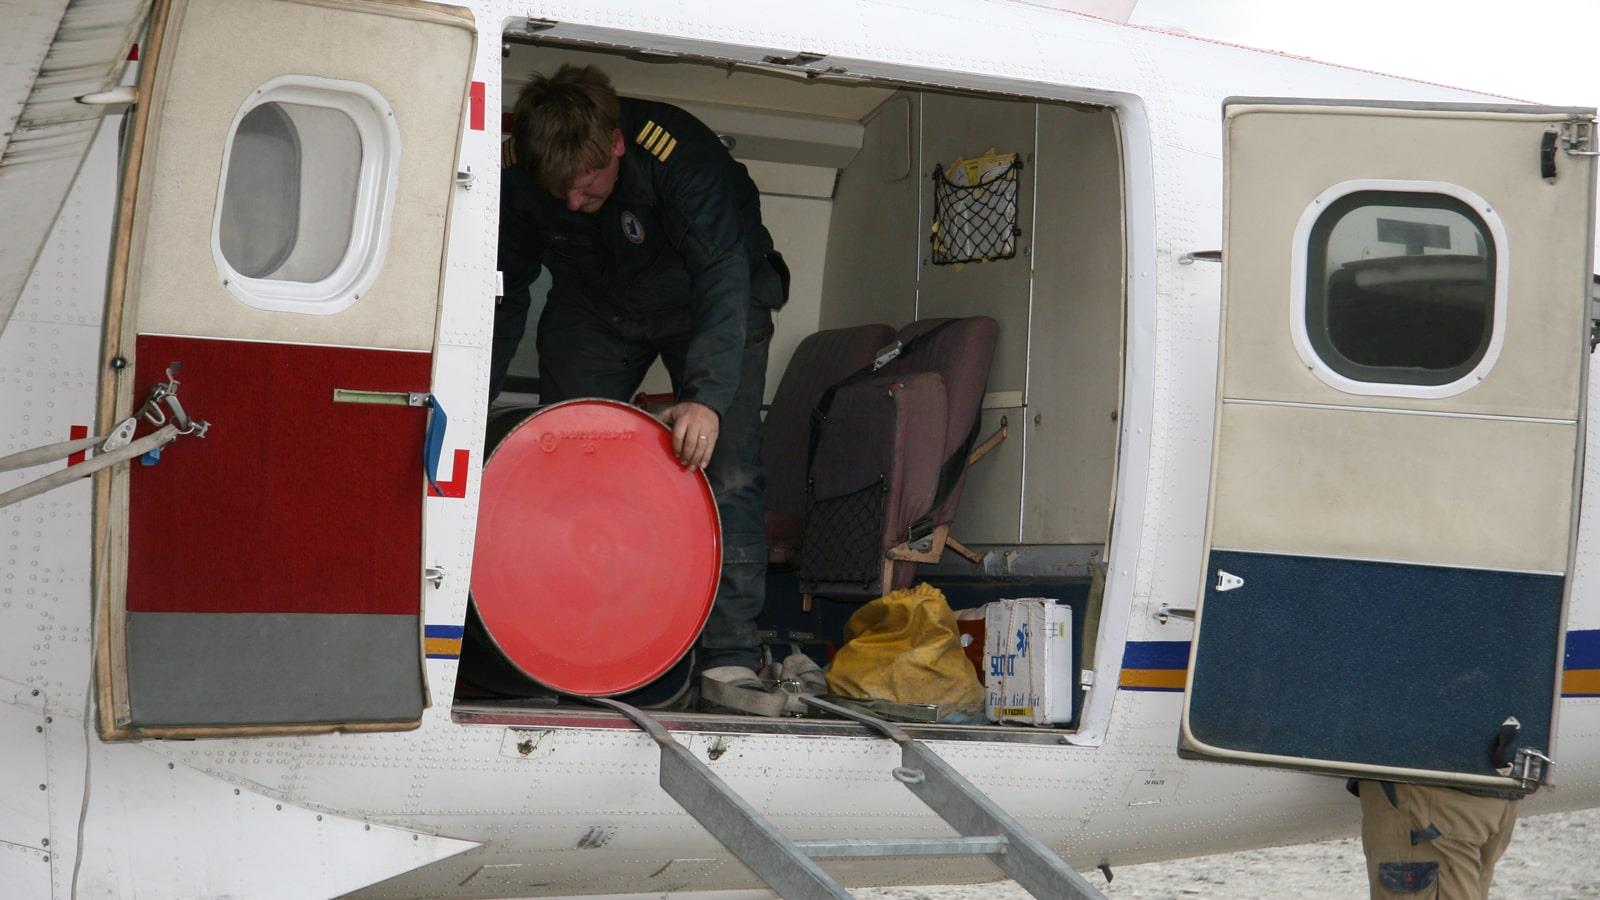 Drum being unloaded from airplane